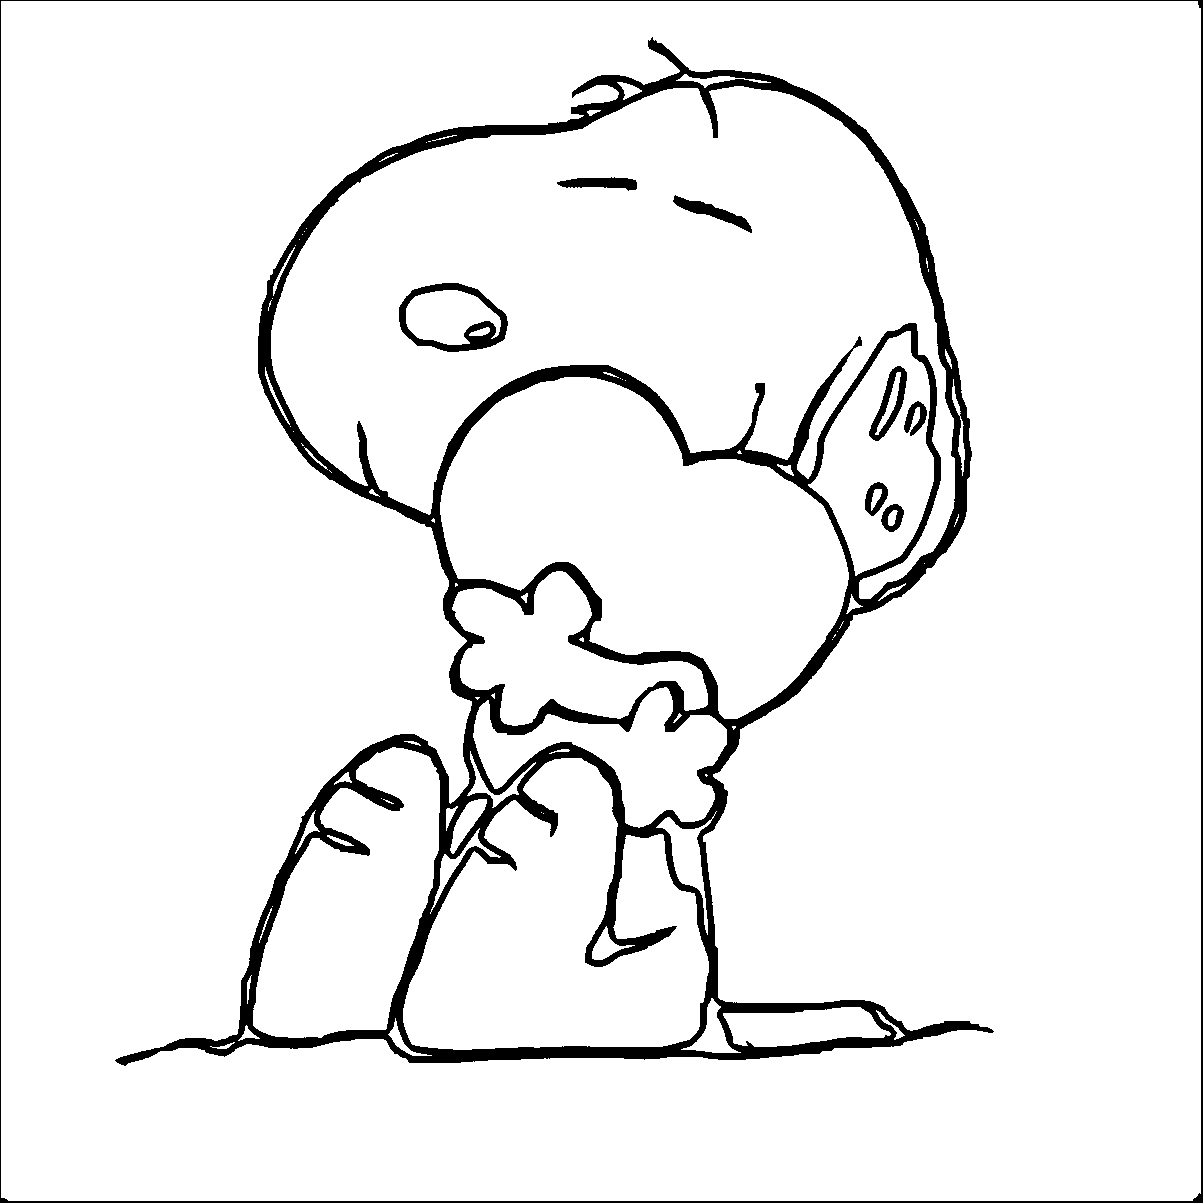 Snoopy Valentines Day Coloring Page | Wecoloringpage